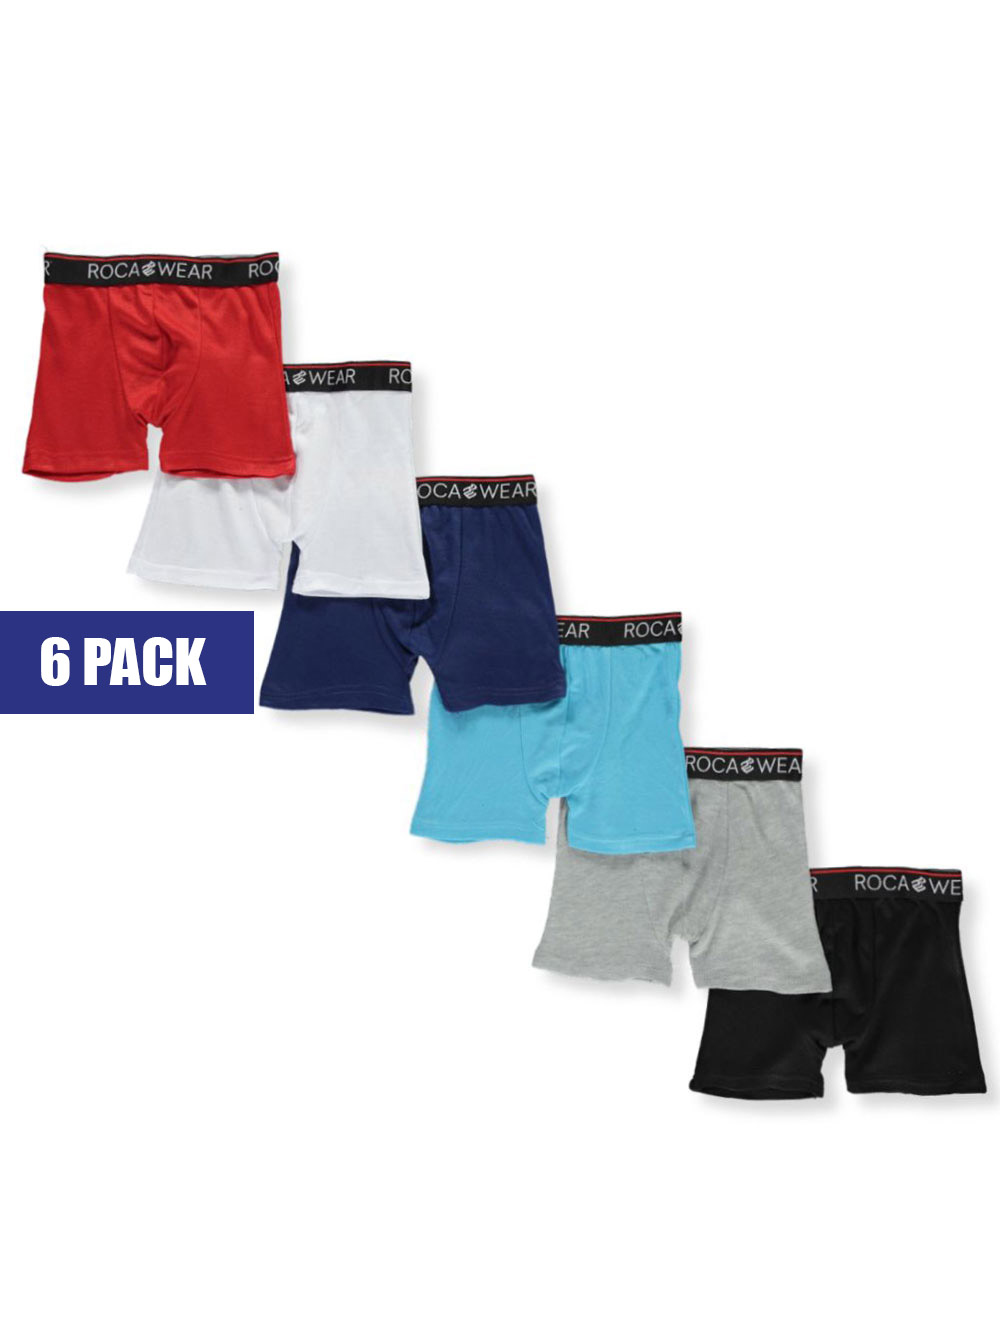  Hanes Boys Potty Trainer Boxer Briefs, 10-pack Baby